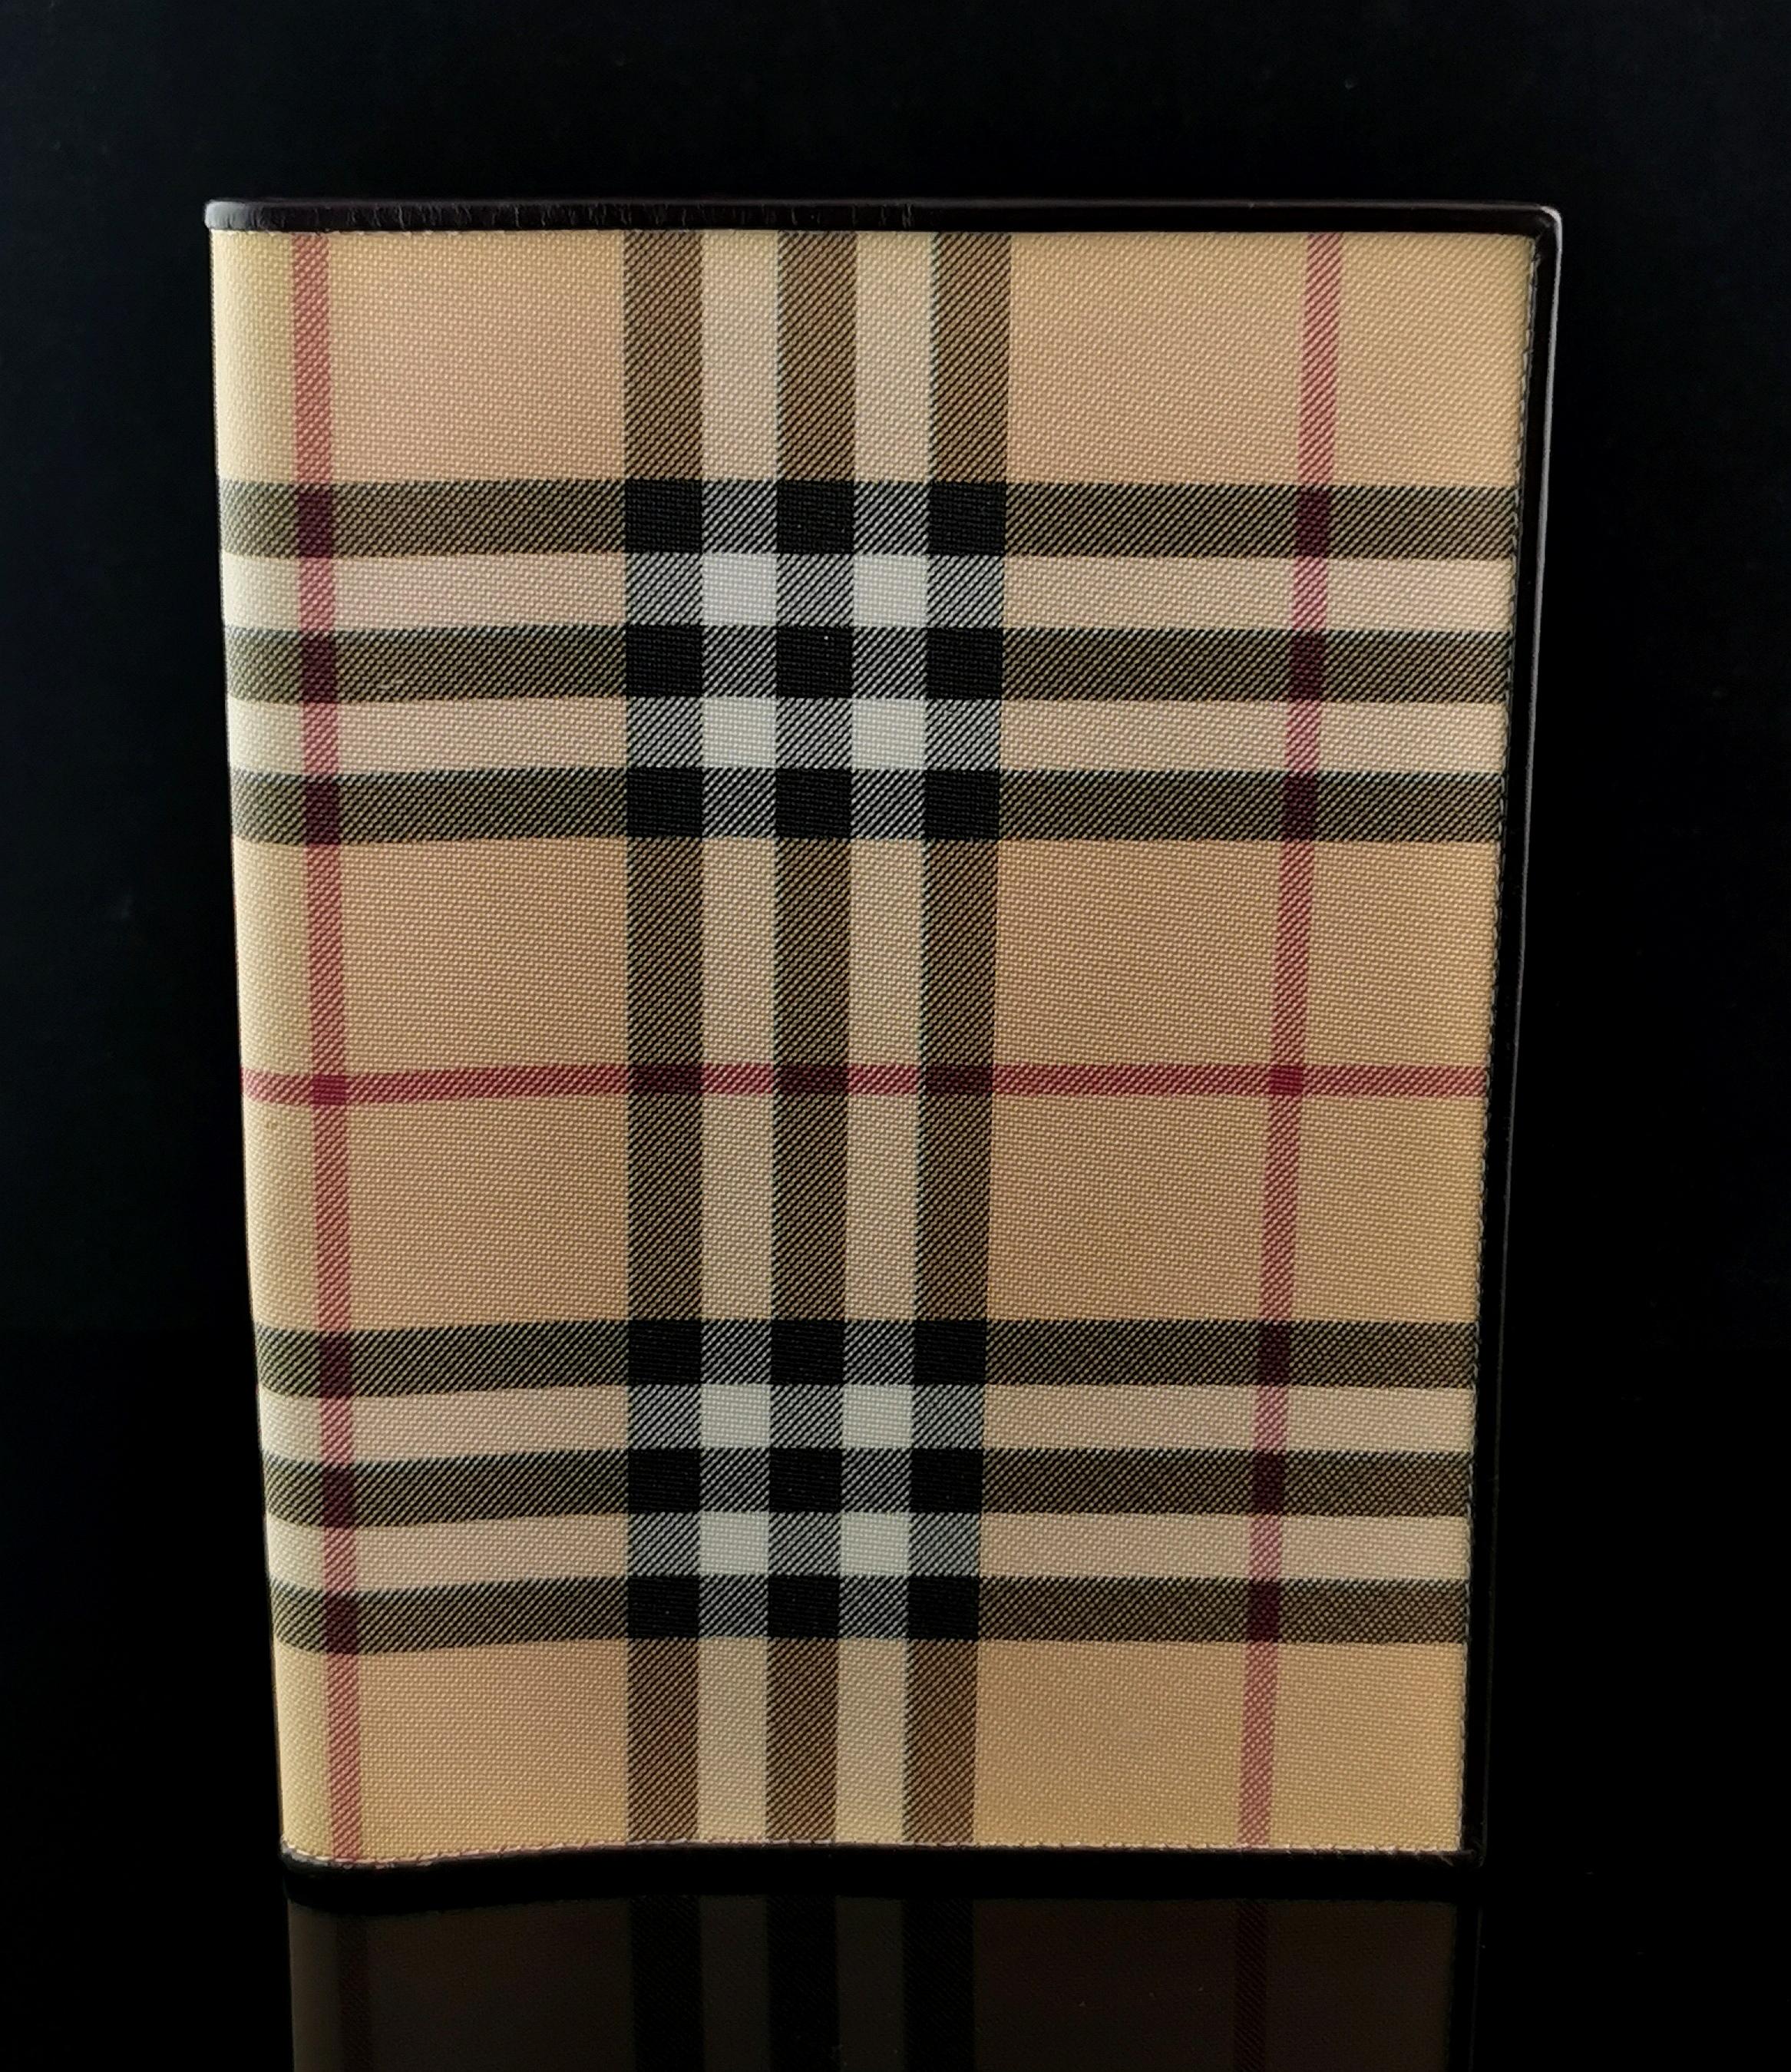 A stylish vintage Burberry notebook cover.

Perfect for covering your school, study or work notebooks so you can do it in style.

It is made from coated canvas with a dark brown leather trim and interior for holding the book.

Stamped to the lower